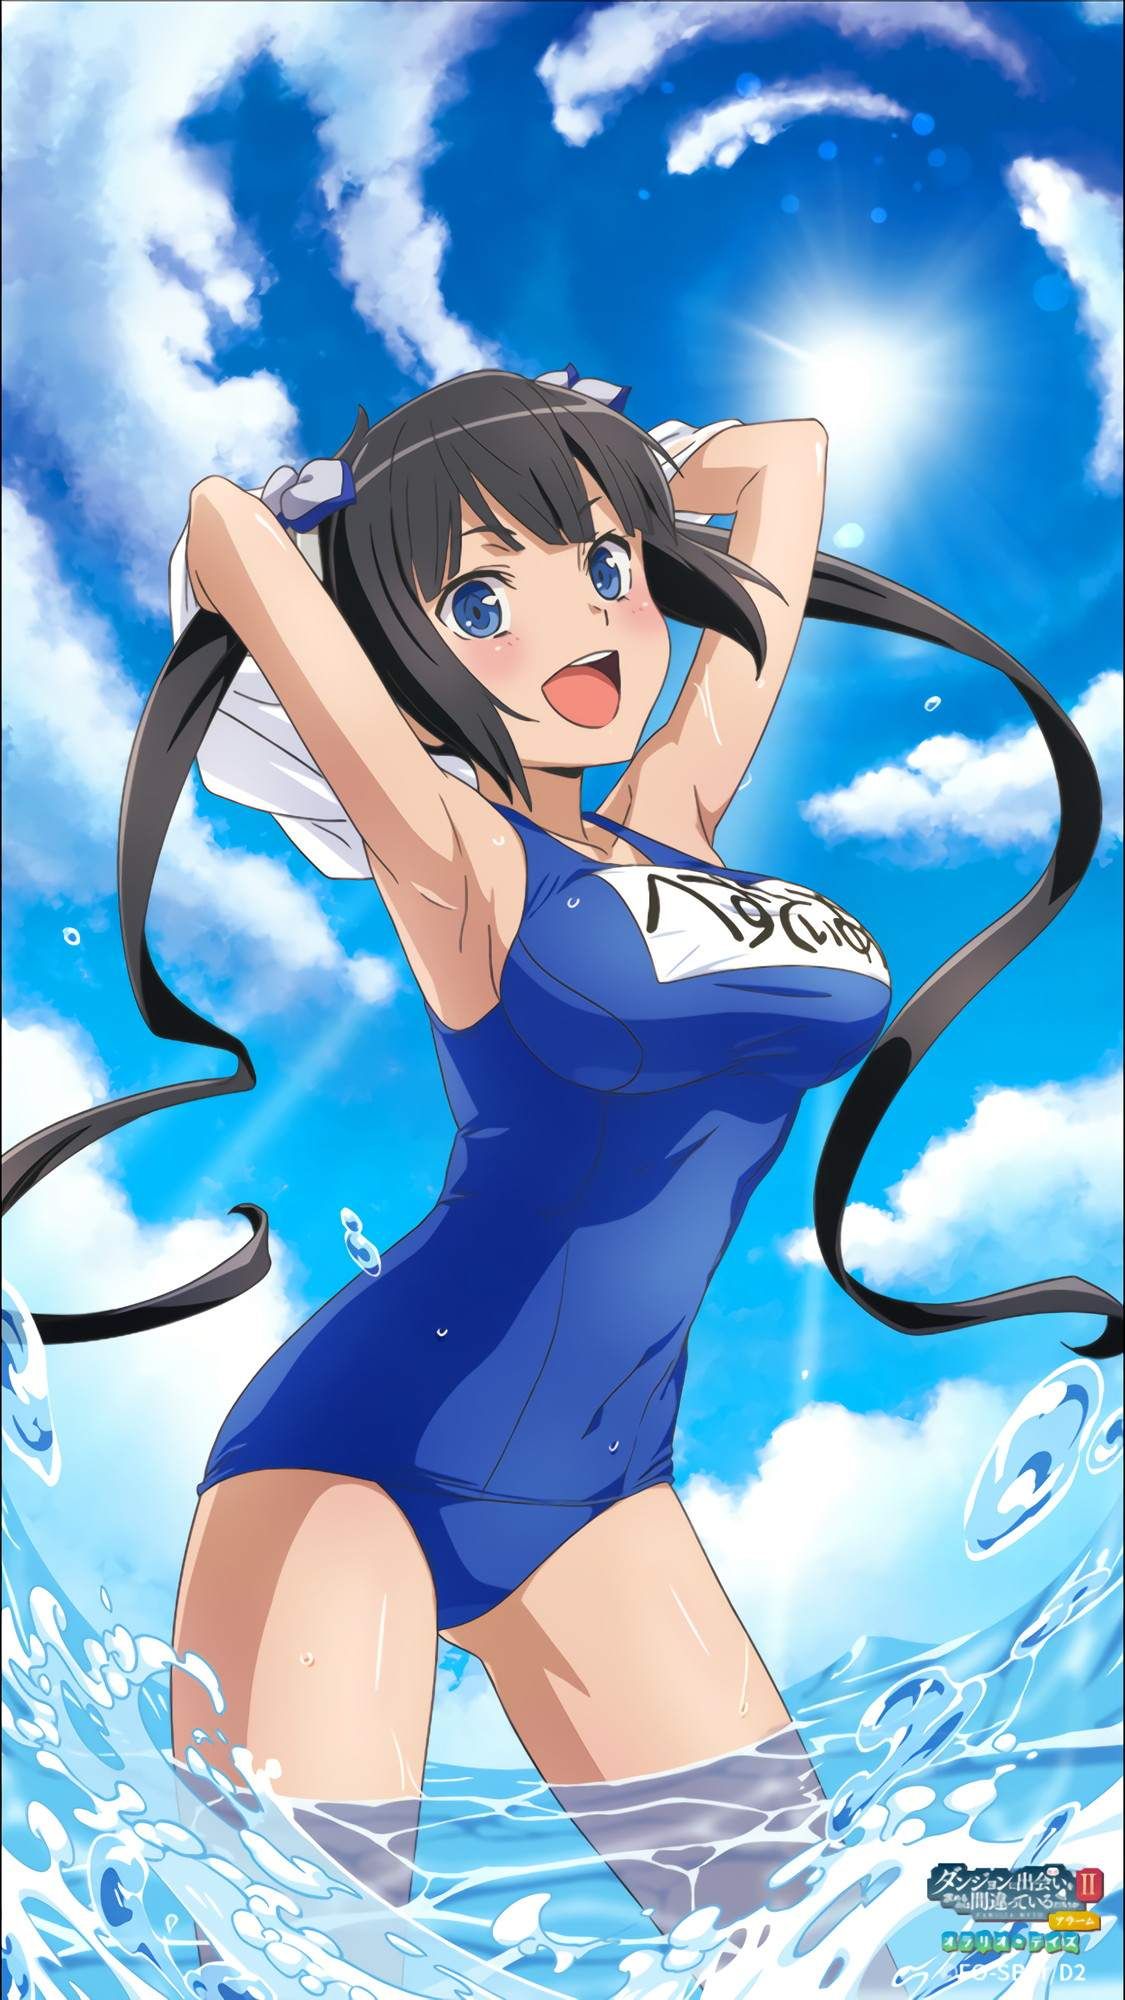 This is a two-dimensional erotic image of a girl wearing plump squirt water that says "This is no good..." 24